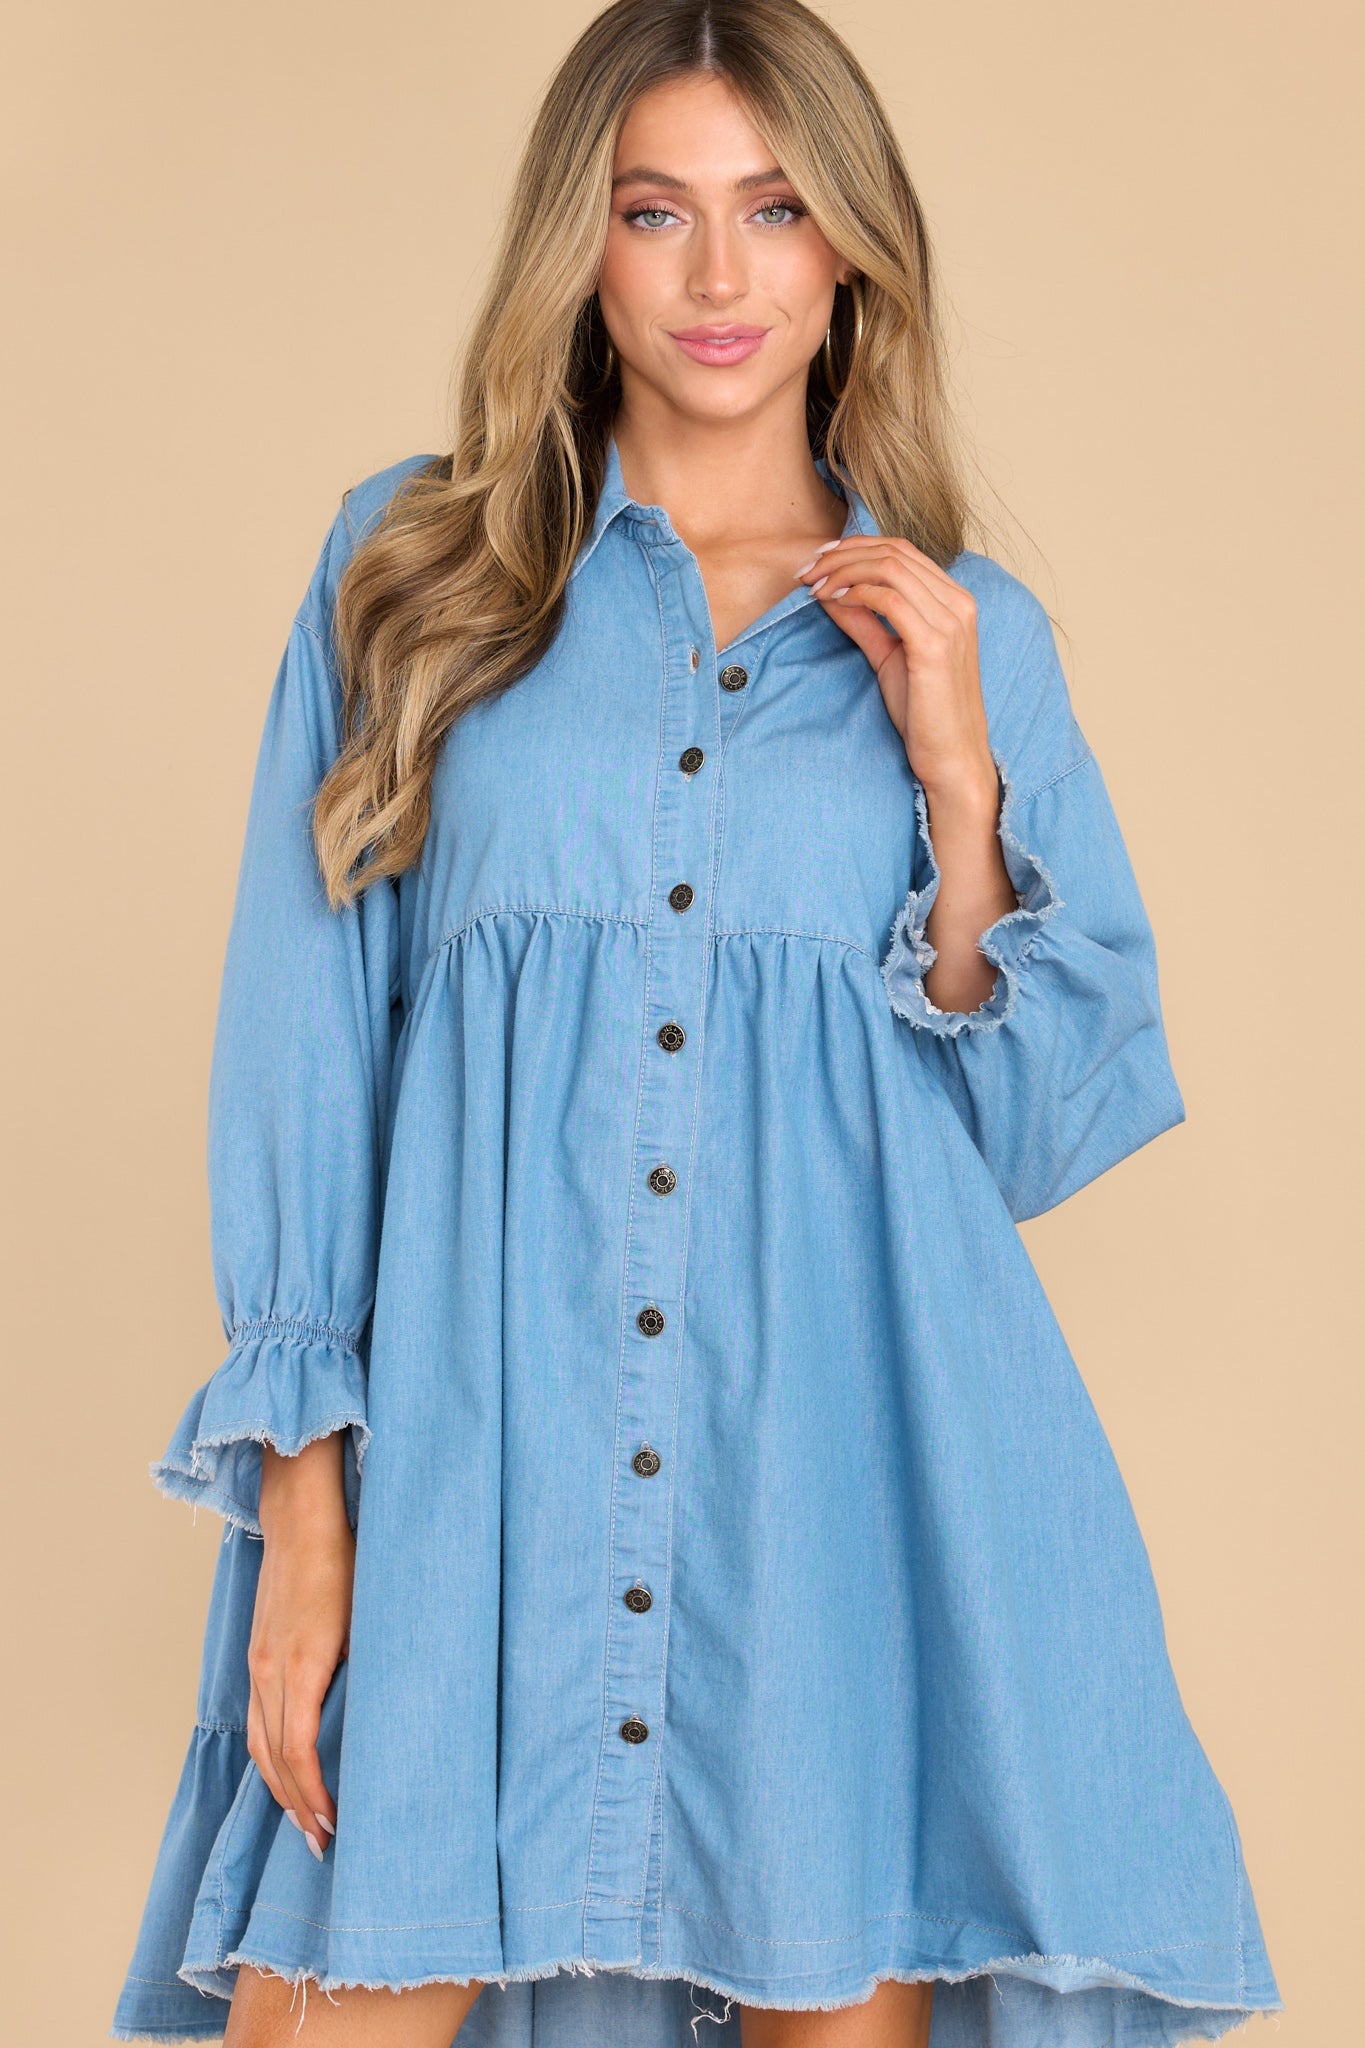 Give In To Me Light Wash Chambray Dress - Red Dress